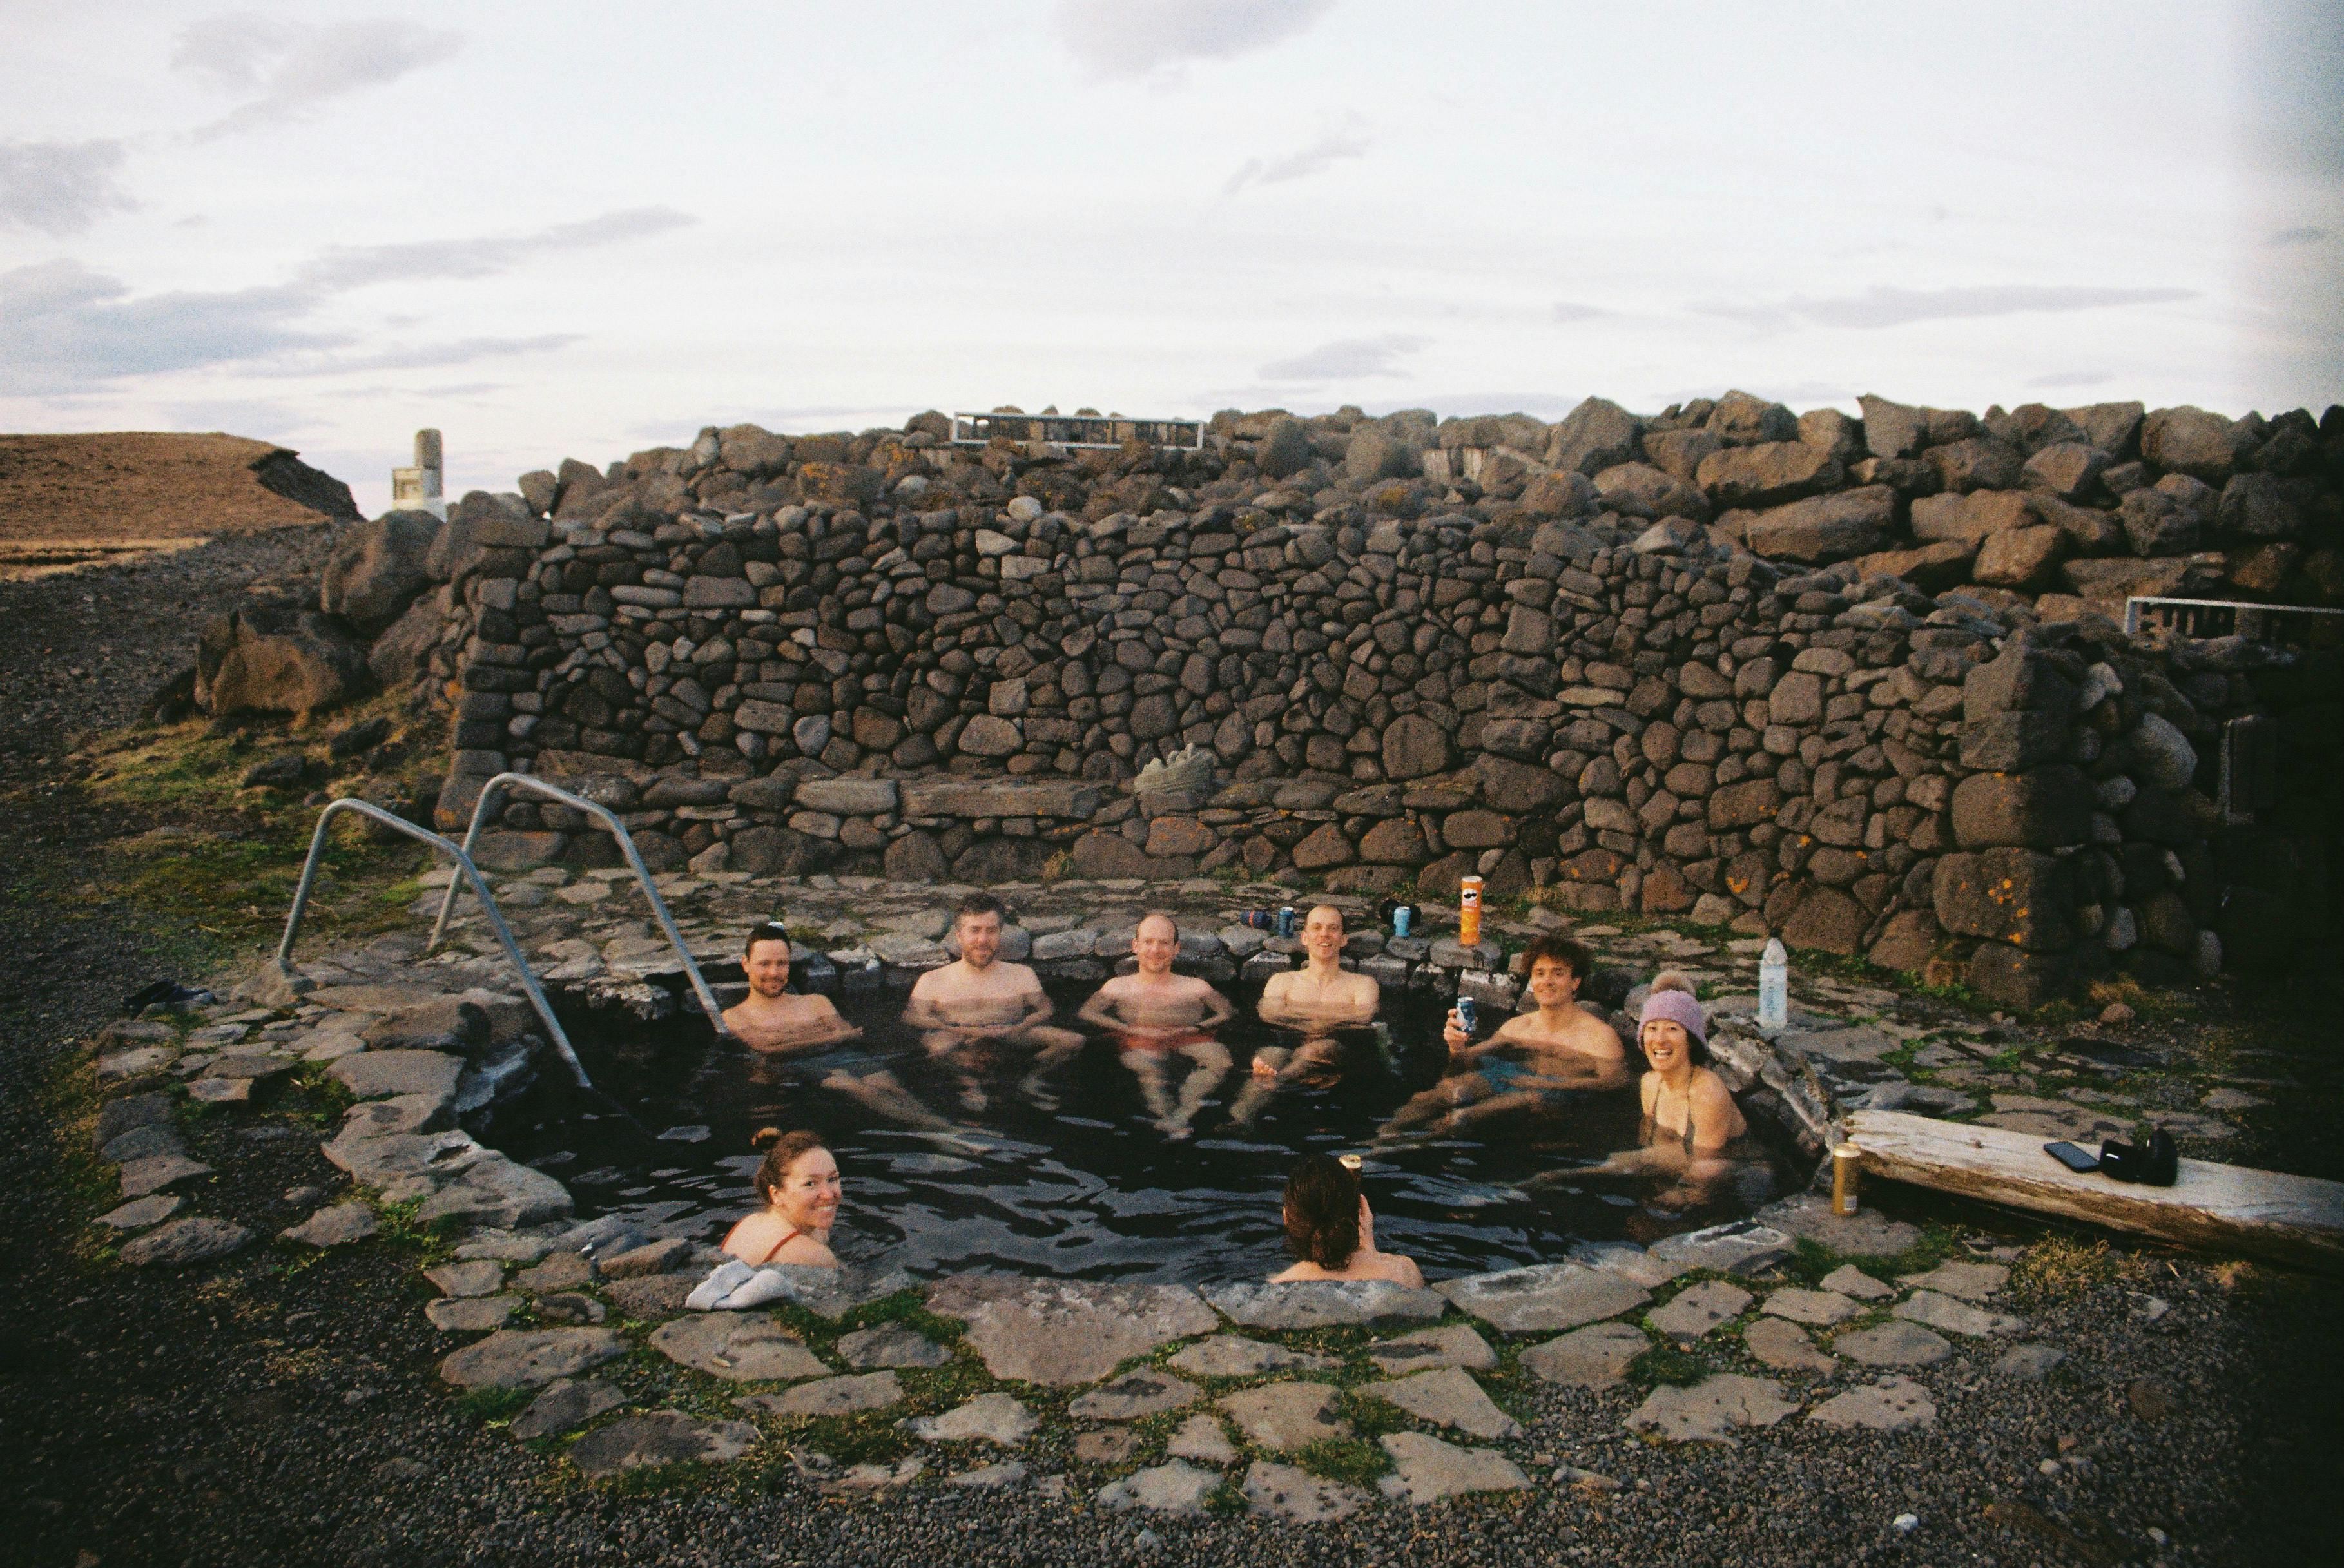 A group of friends enjoying a hot spring in Iceland